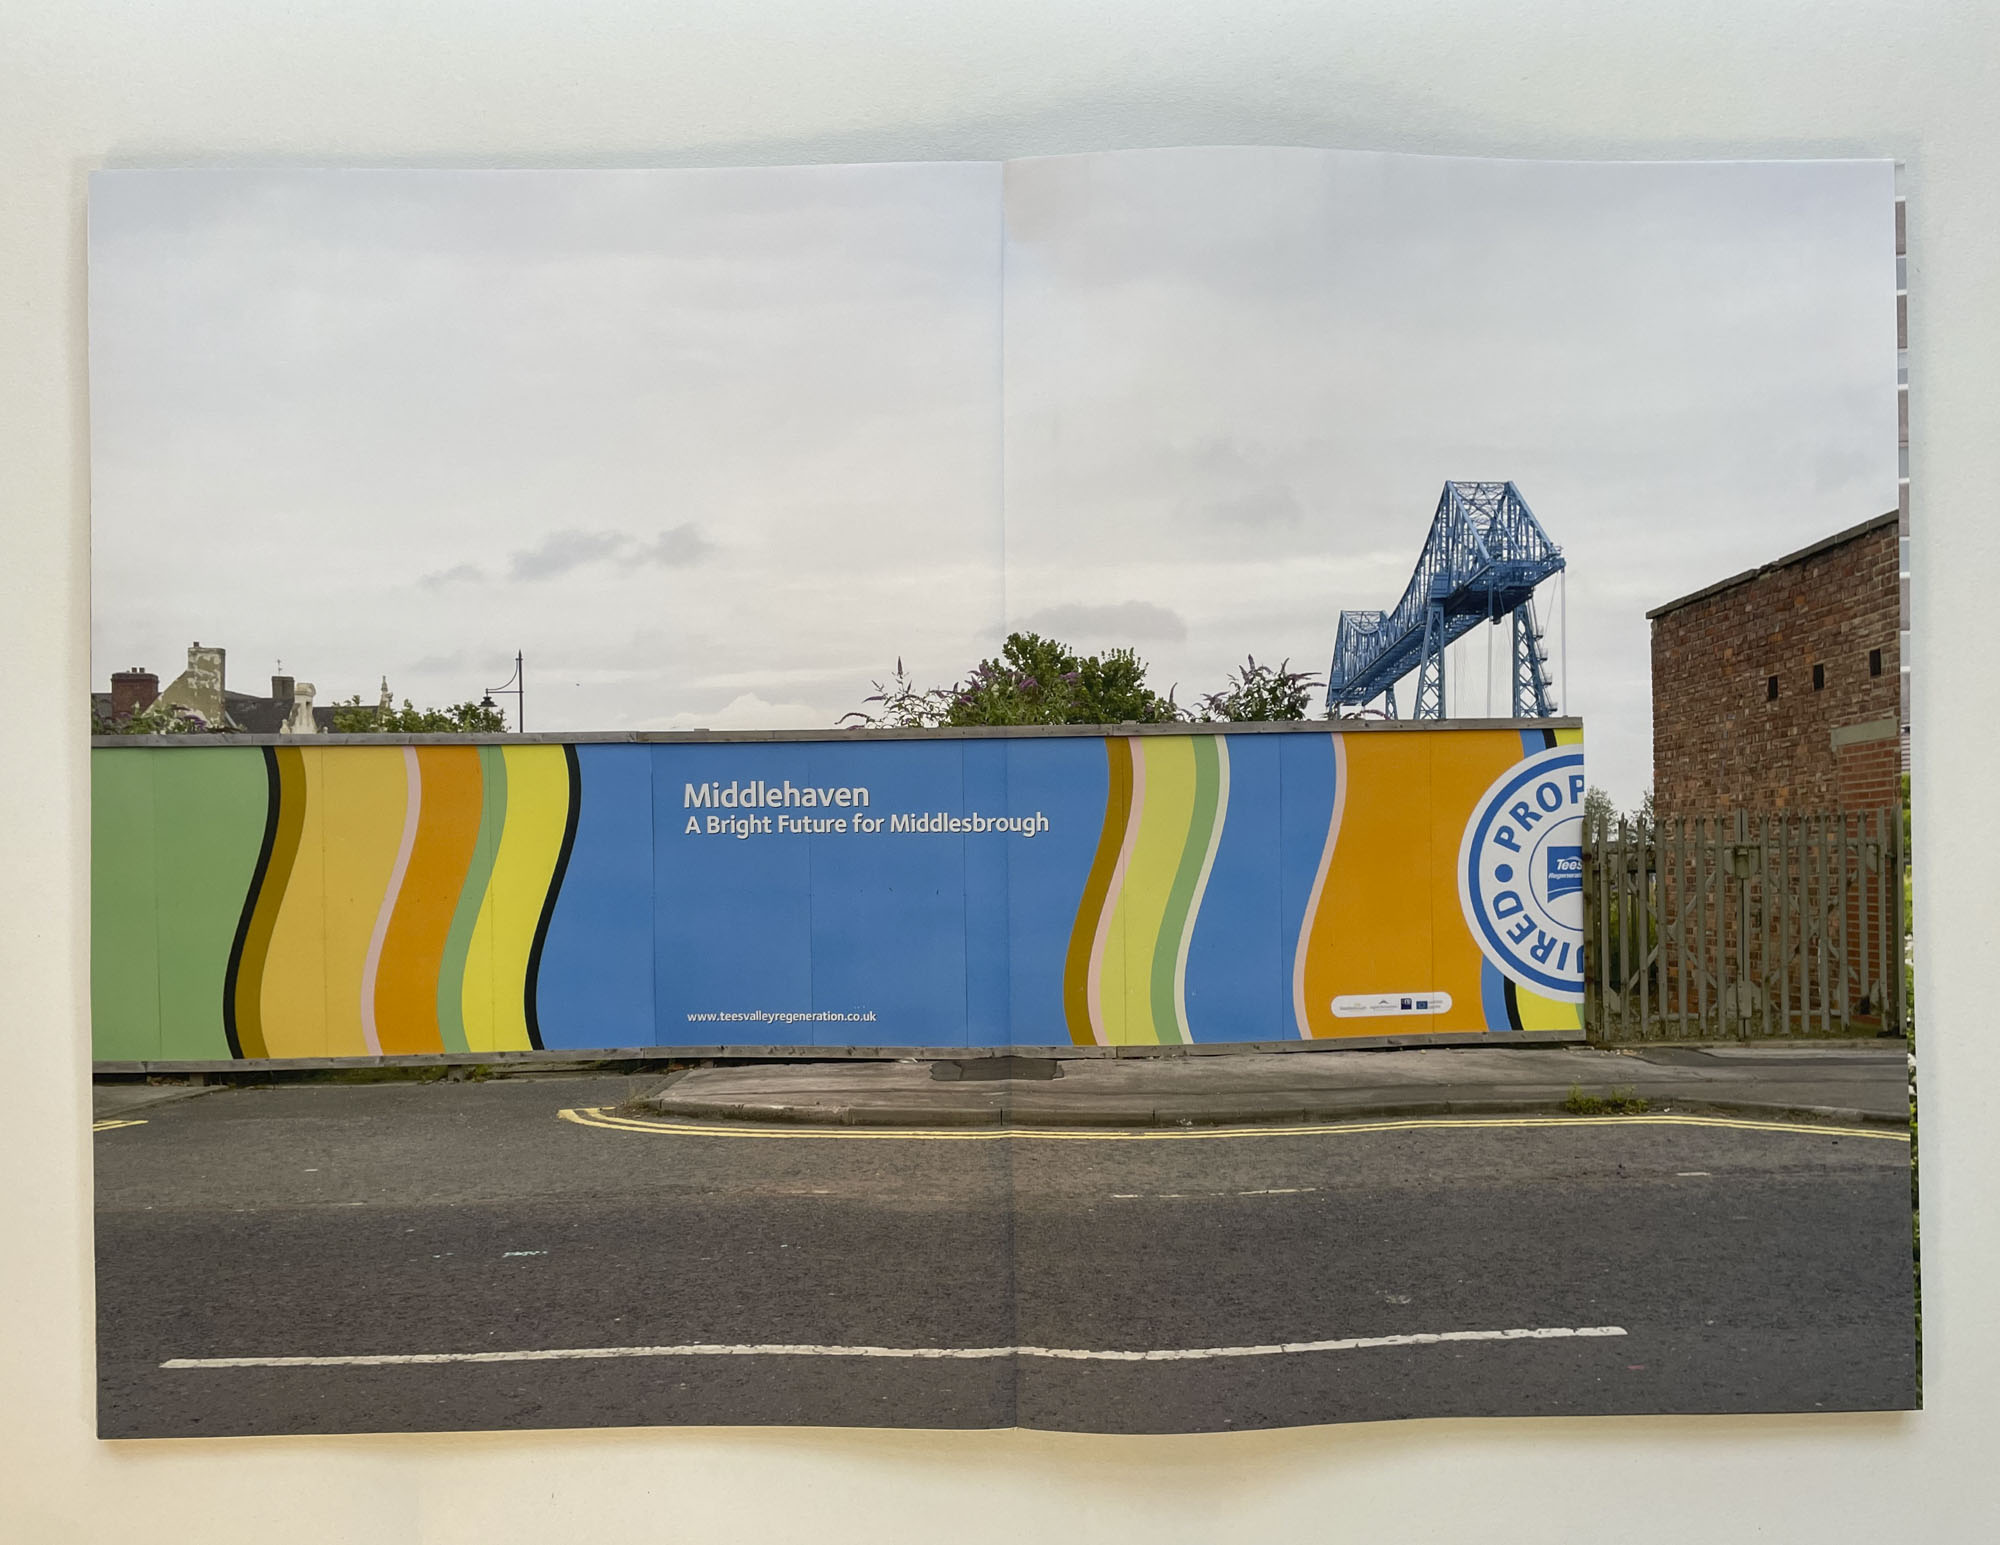 a hoarding displays the words Middlehaven - a Bright future for Middlesbrough, behind rises the towns transporter